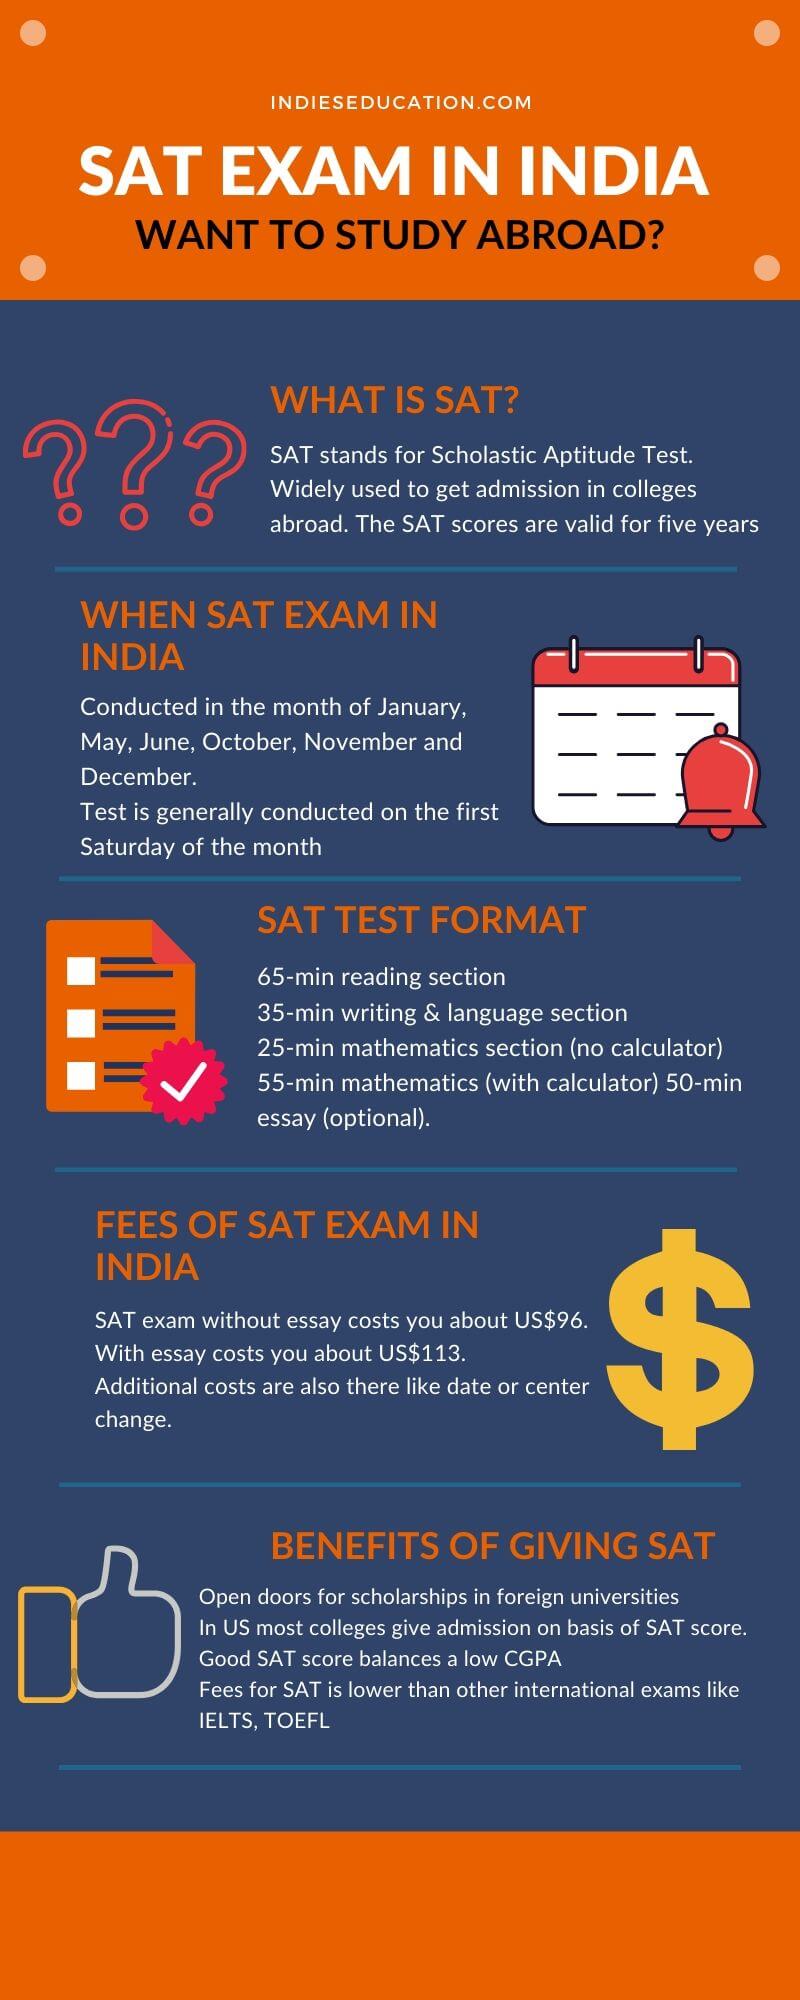 All-about-sat-exam-in-India-detail-infographic